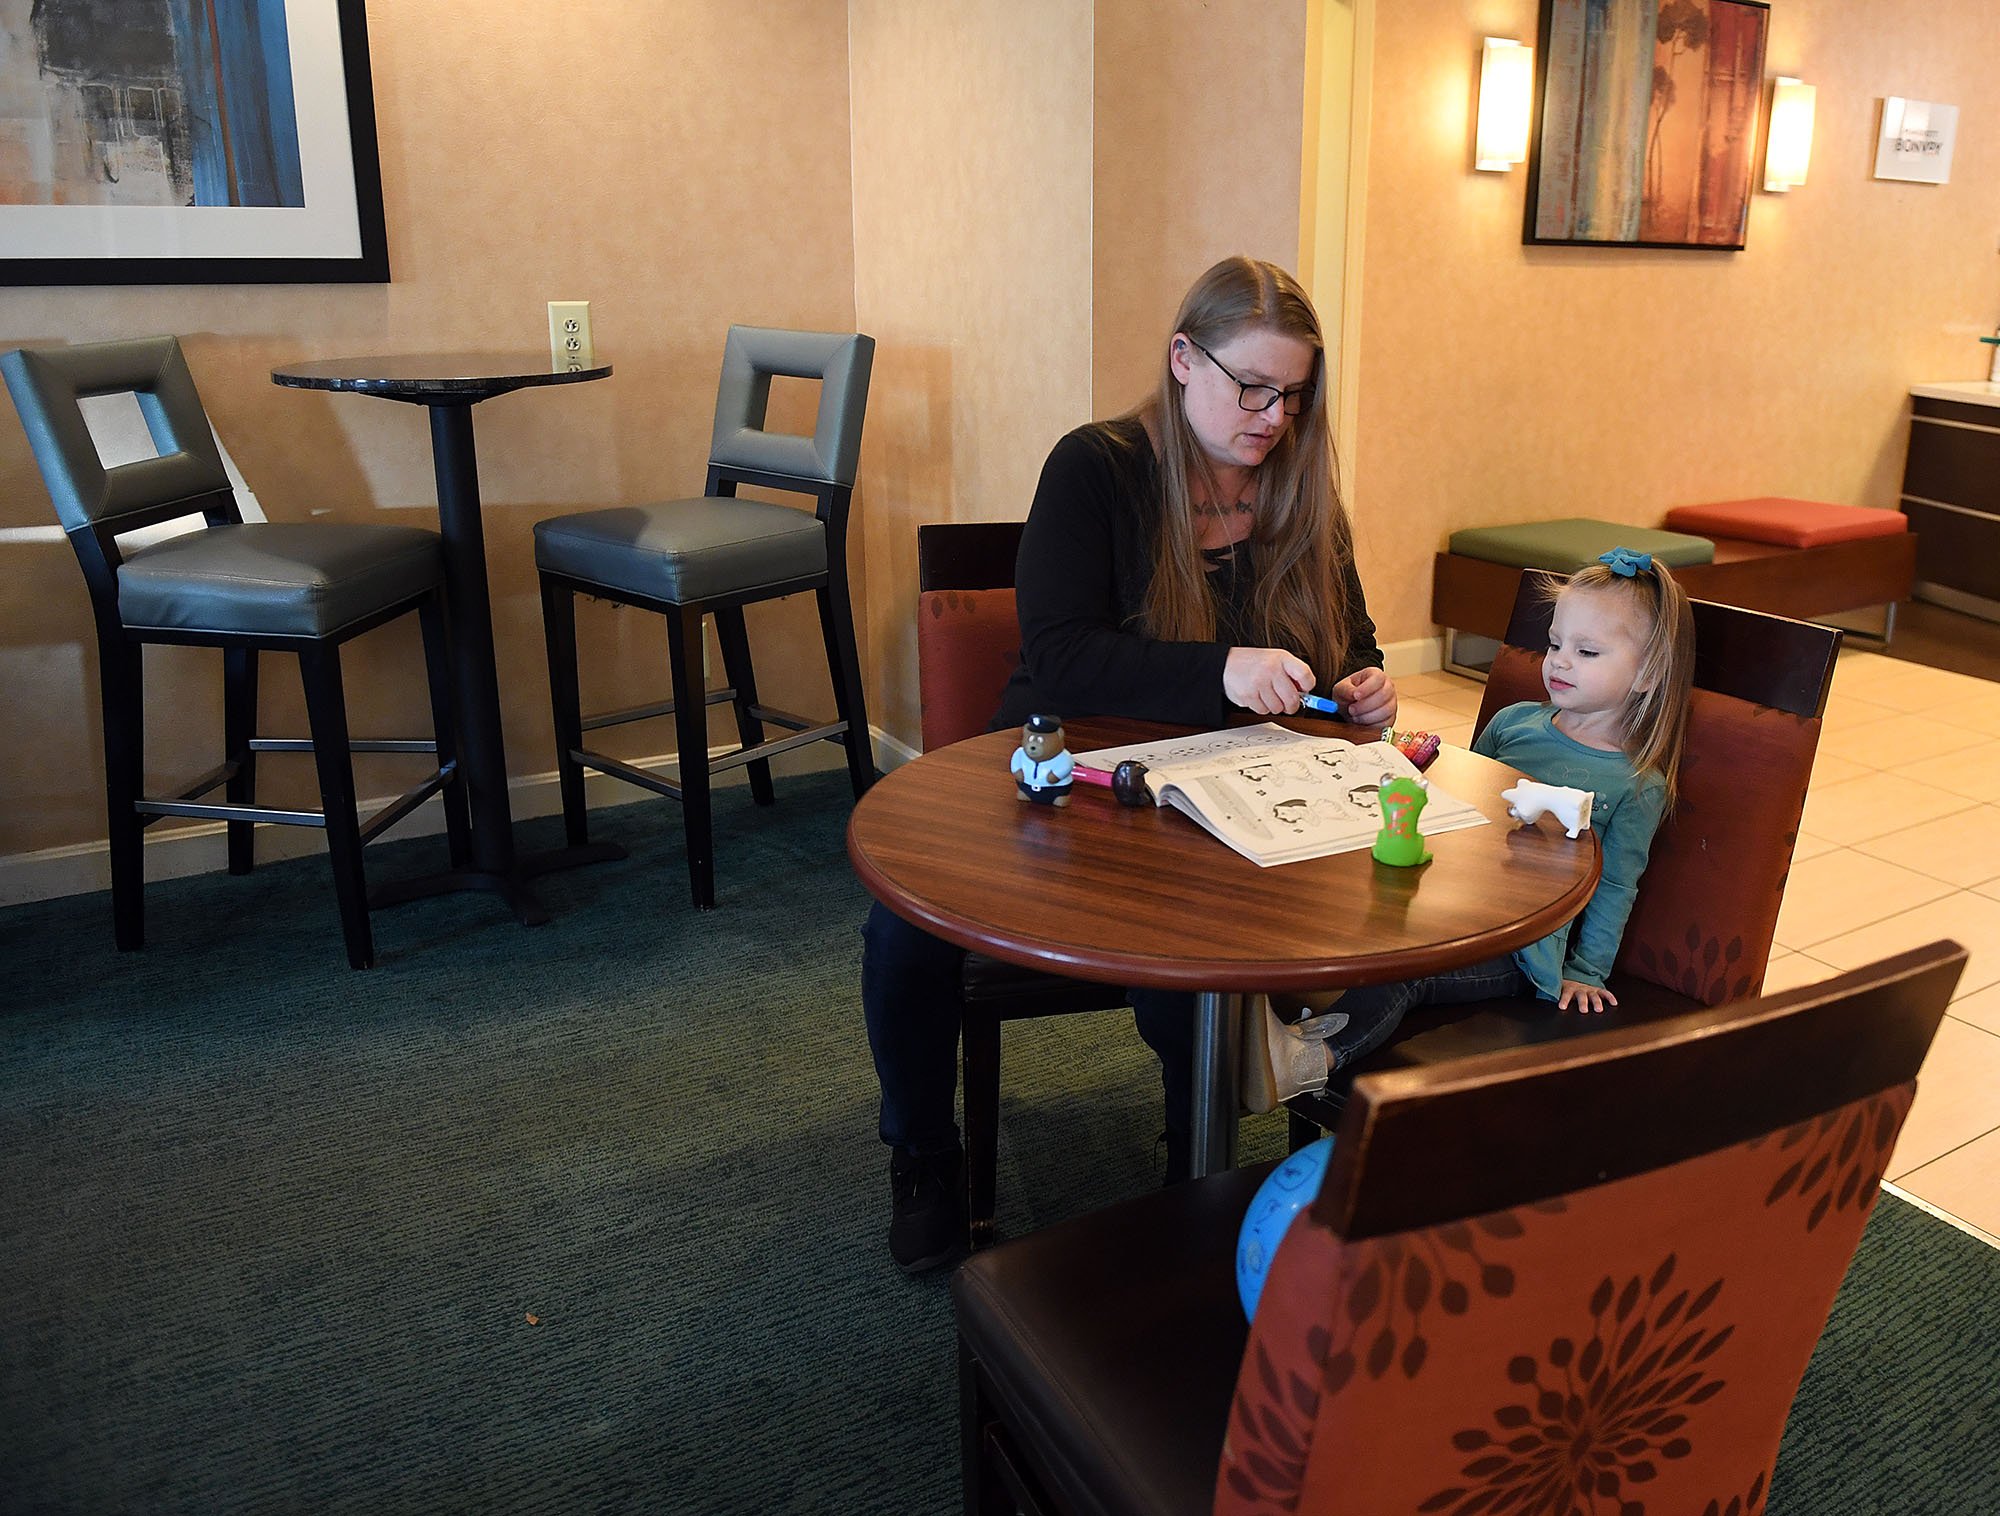  Valarie Levy colors with her daughter Azrielle, 2, in the lobby of the Residence Inn Mystic on Wednesday, November 2, 2022. With no playground they can walk to Valarie struggles to keep the active toddler entertained in a hotel room. The two have be